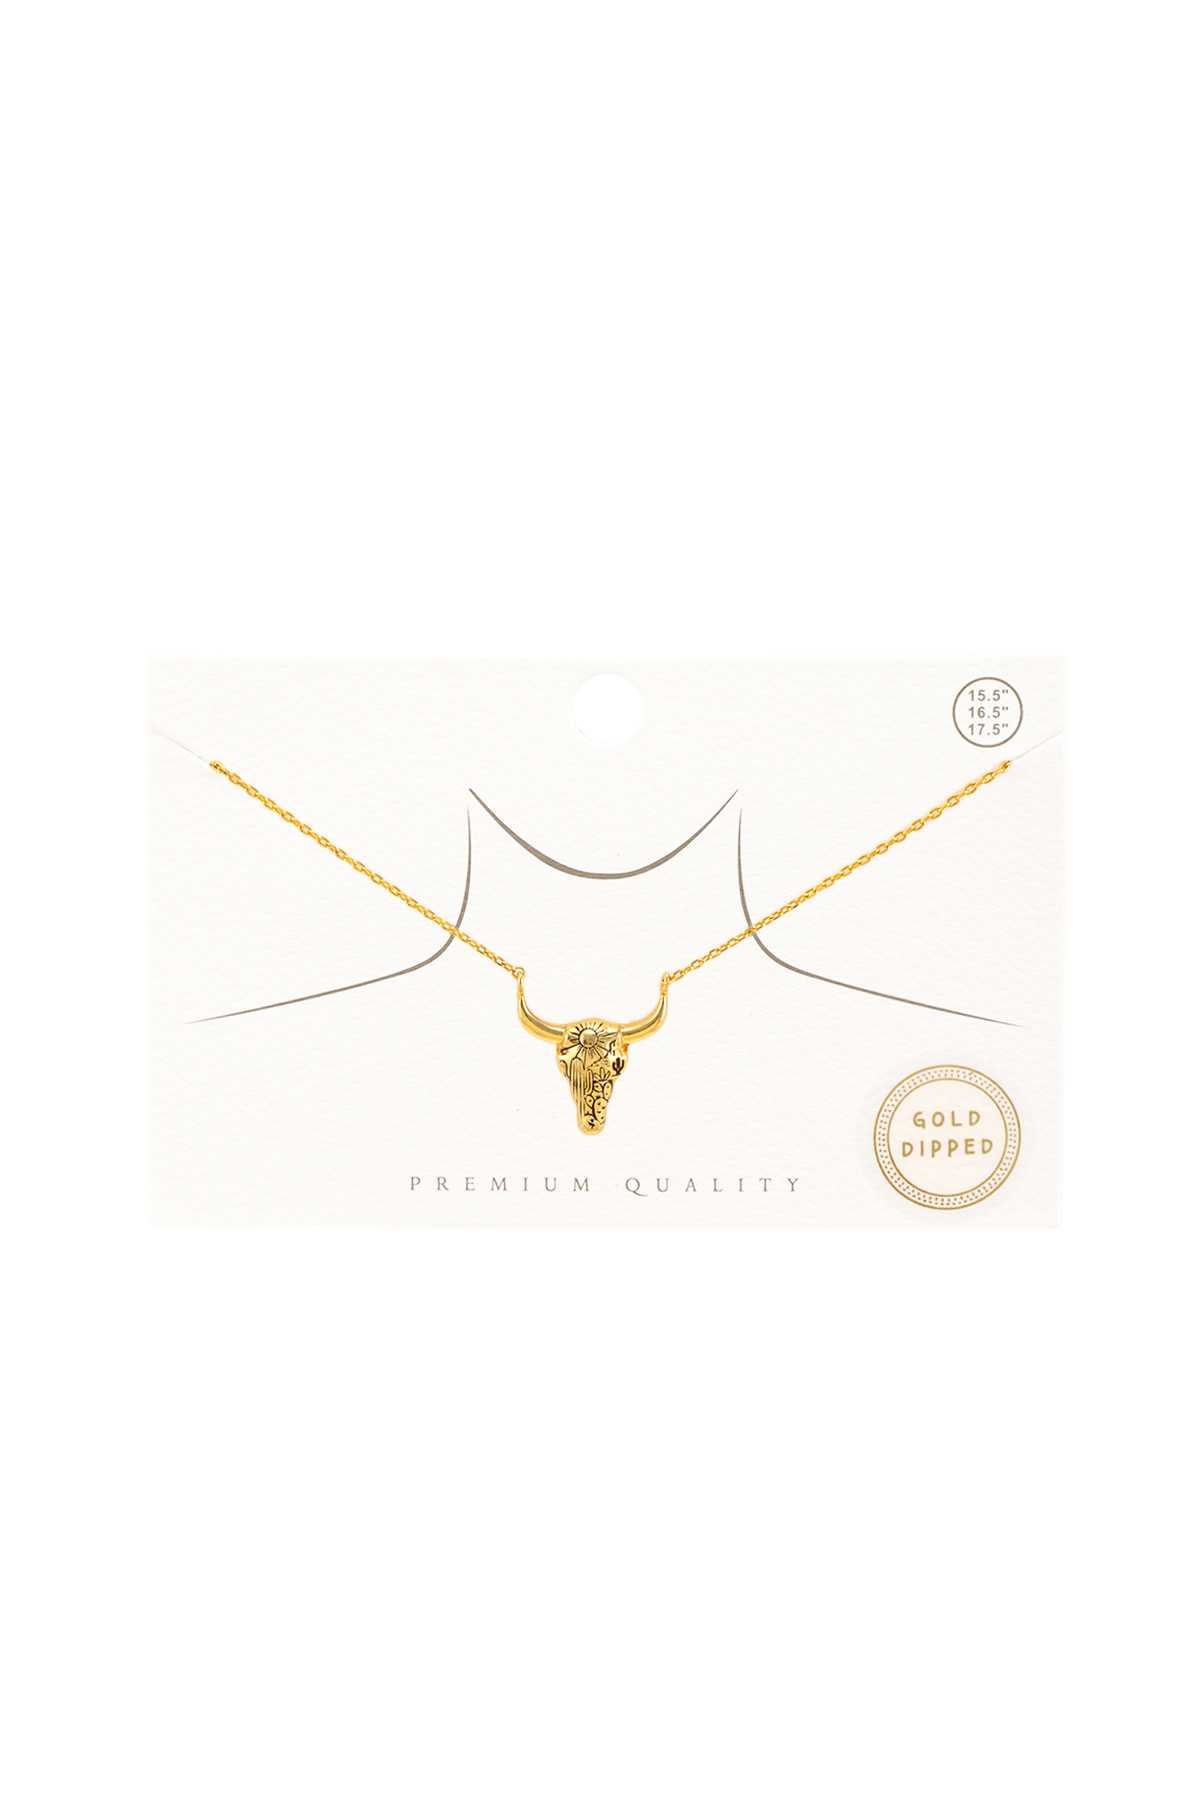 GOLD DIPPED Metal COW Necklace